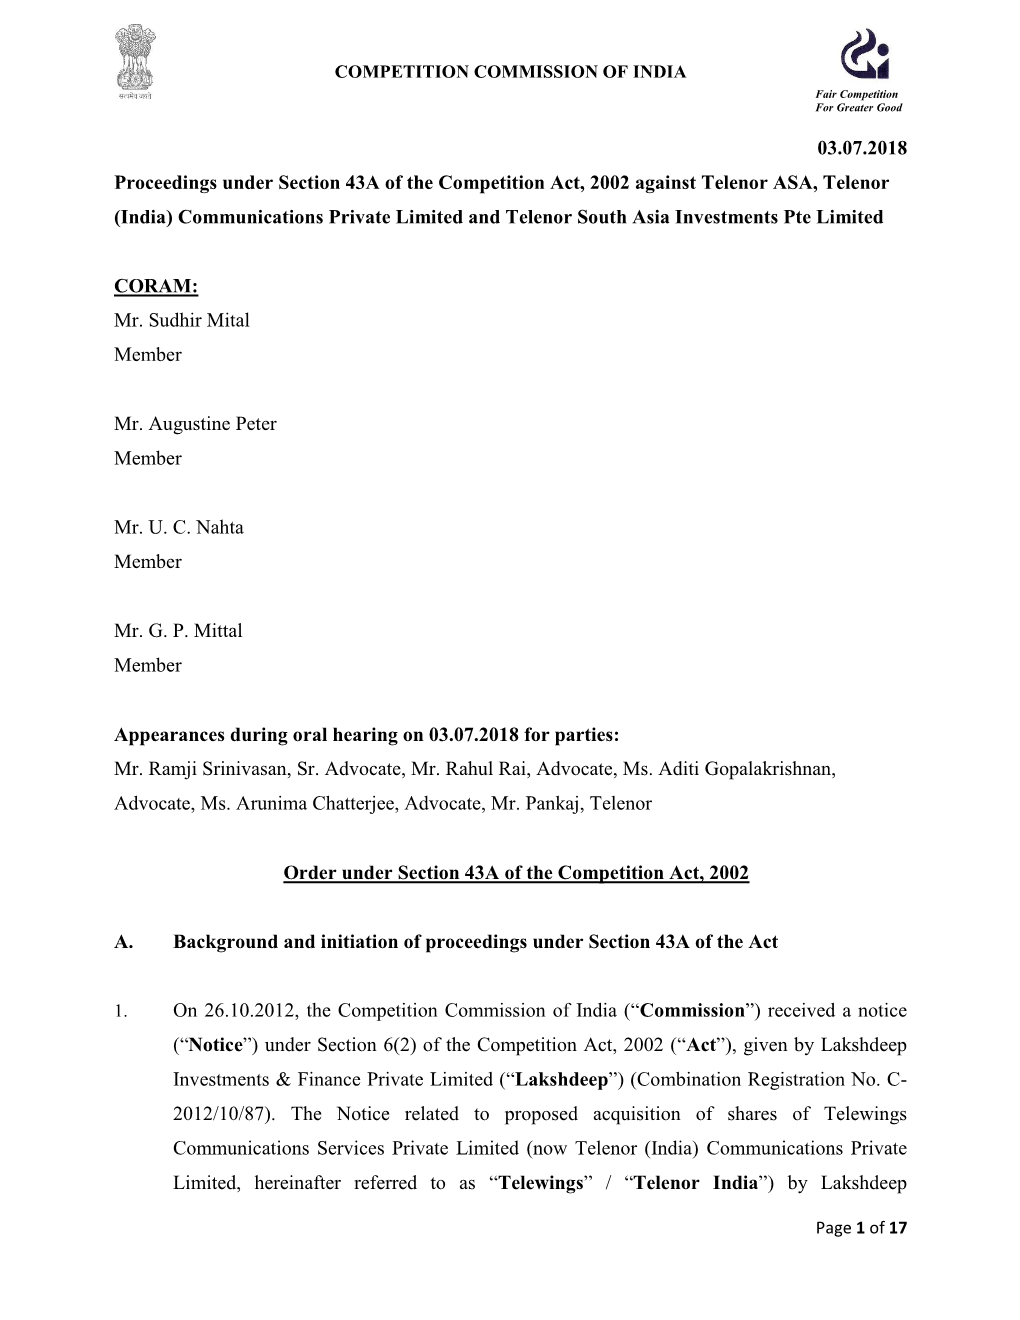 03.07.2018 Proceedings Under Section 43A of the Competition Act, 2002 Against Telenor ASA, Telenor (India) Communications Privat